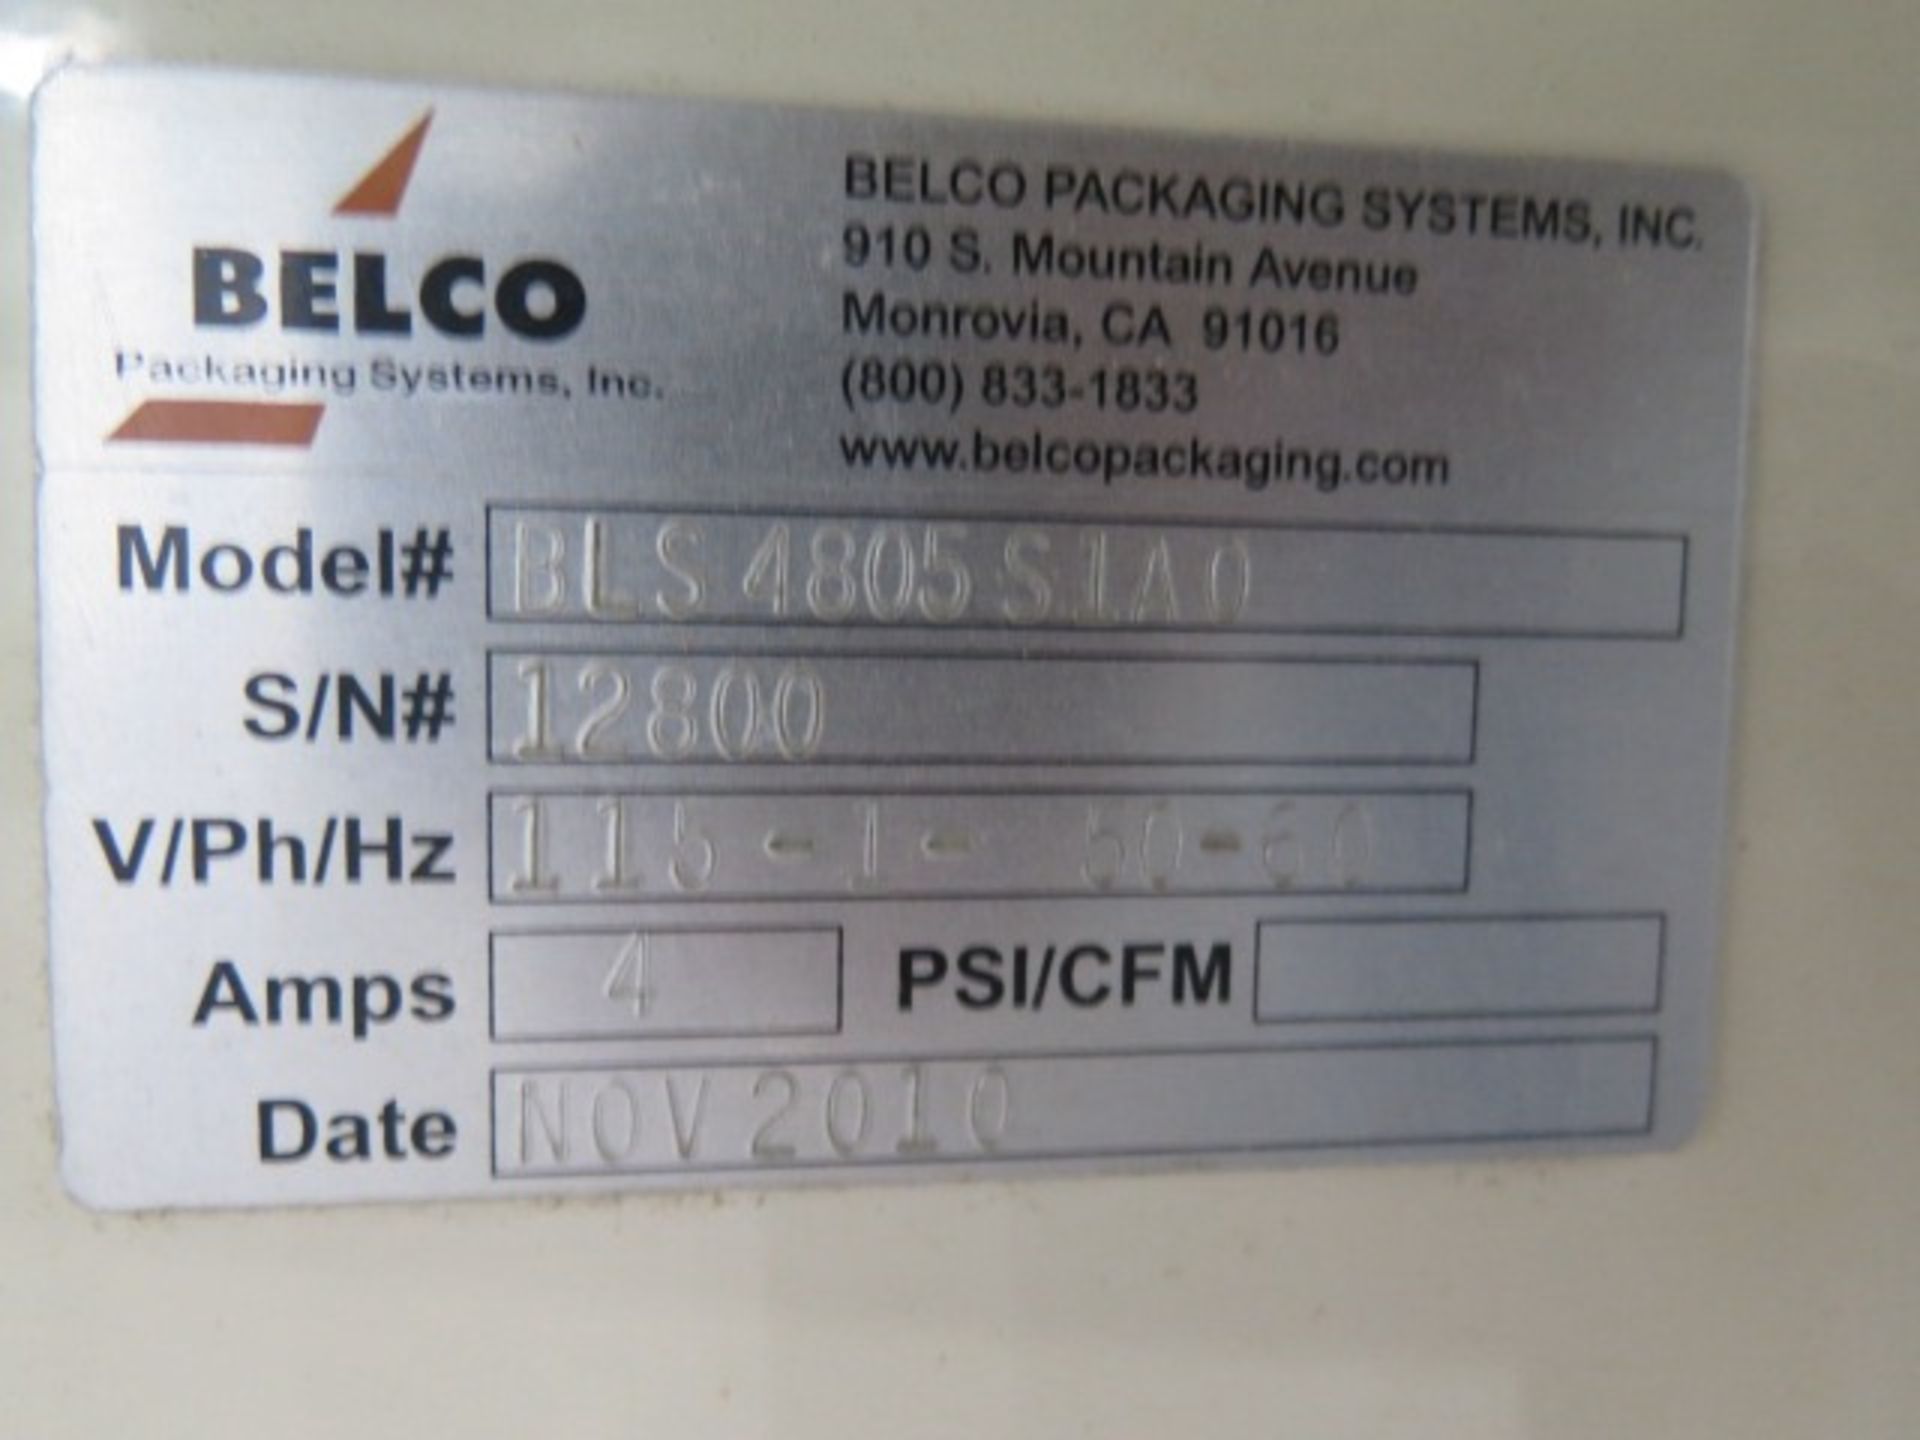 Belco Model BLS 4805 S1A0 Accumulation Table, S/N 12800 | Rig Fee: $100 - Image 9 of 9